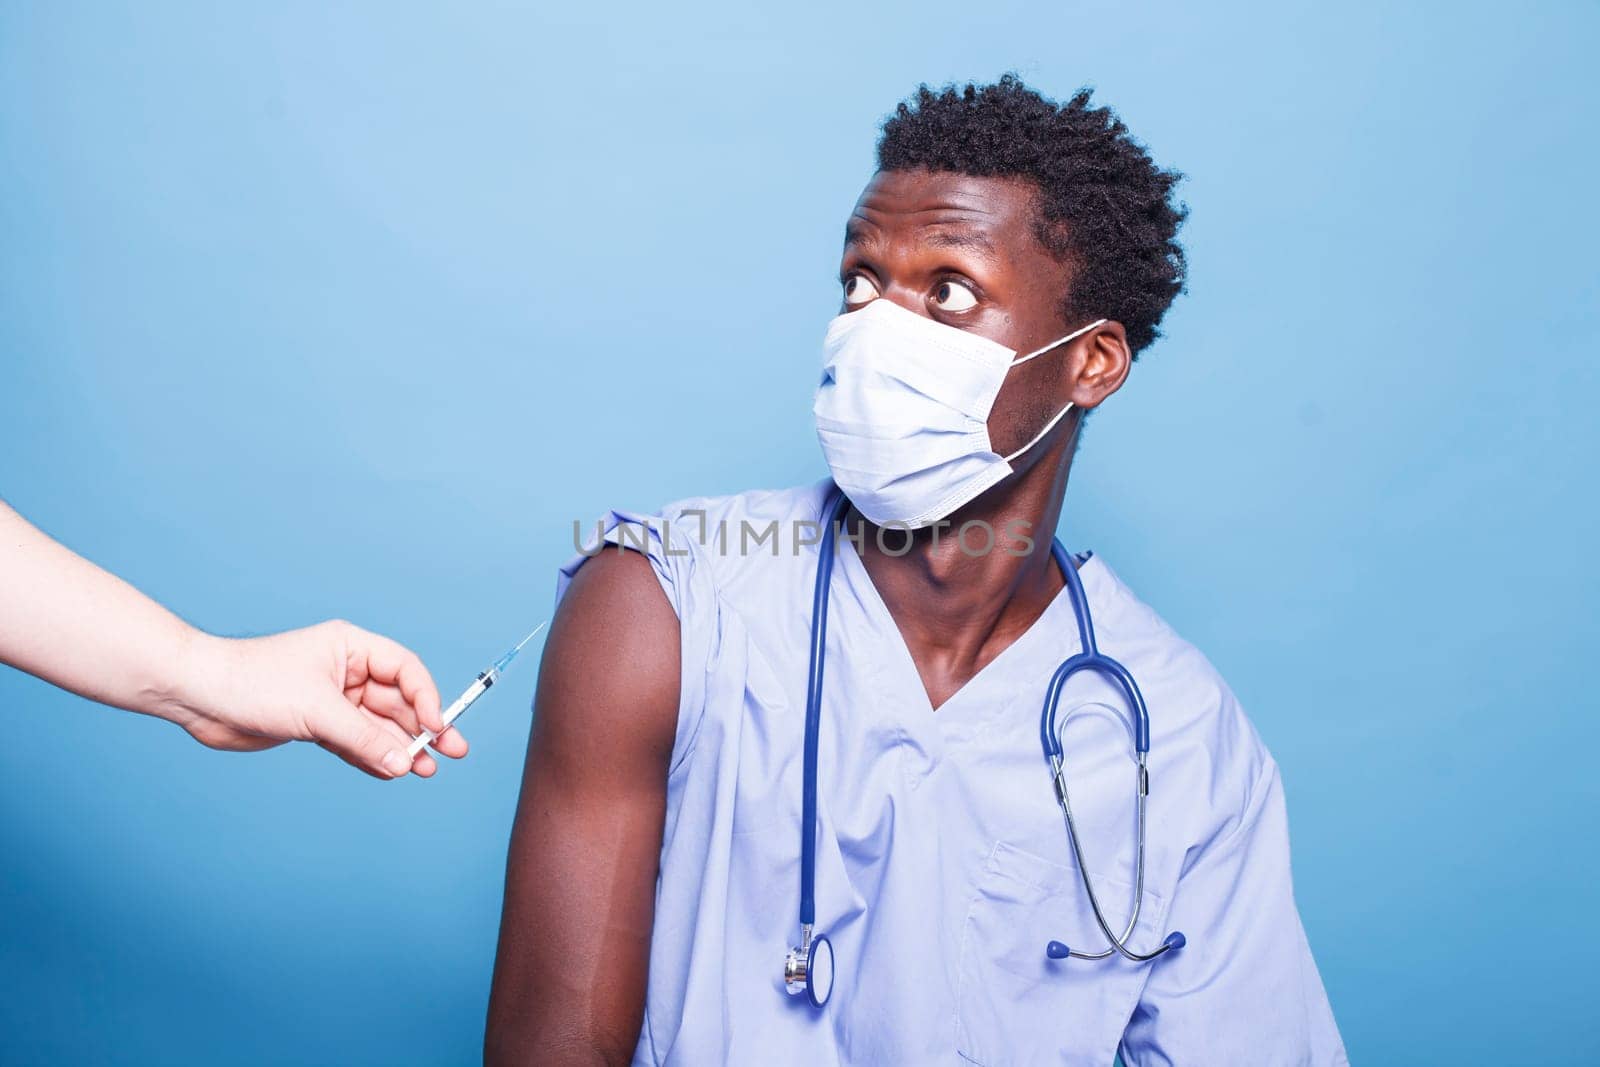 Medical nurse getting vaccinated by DCStudio